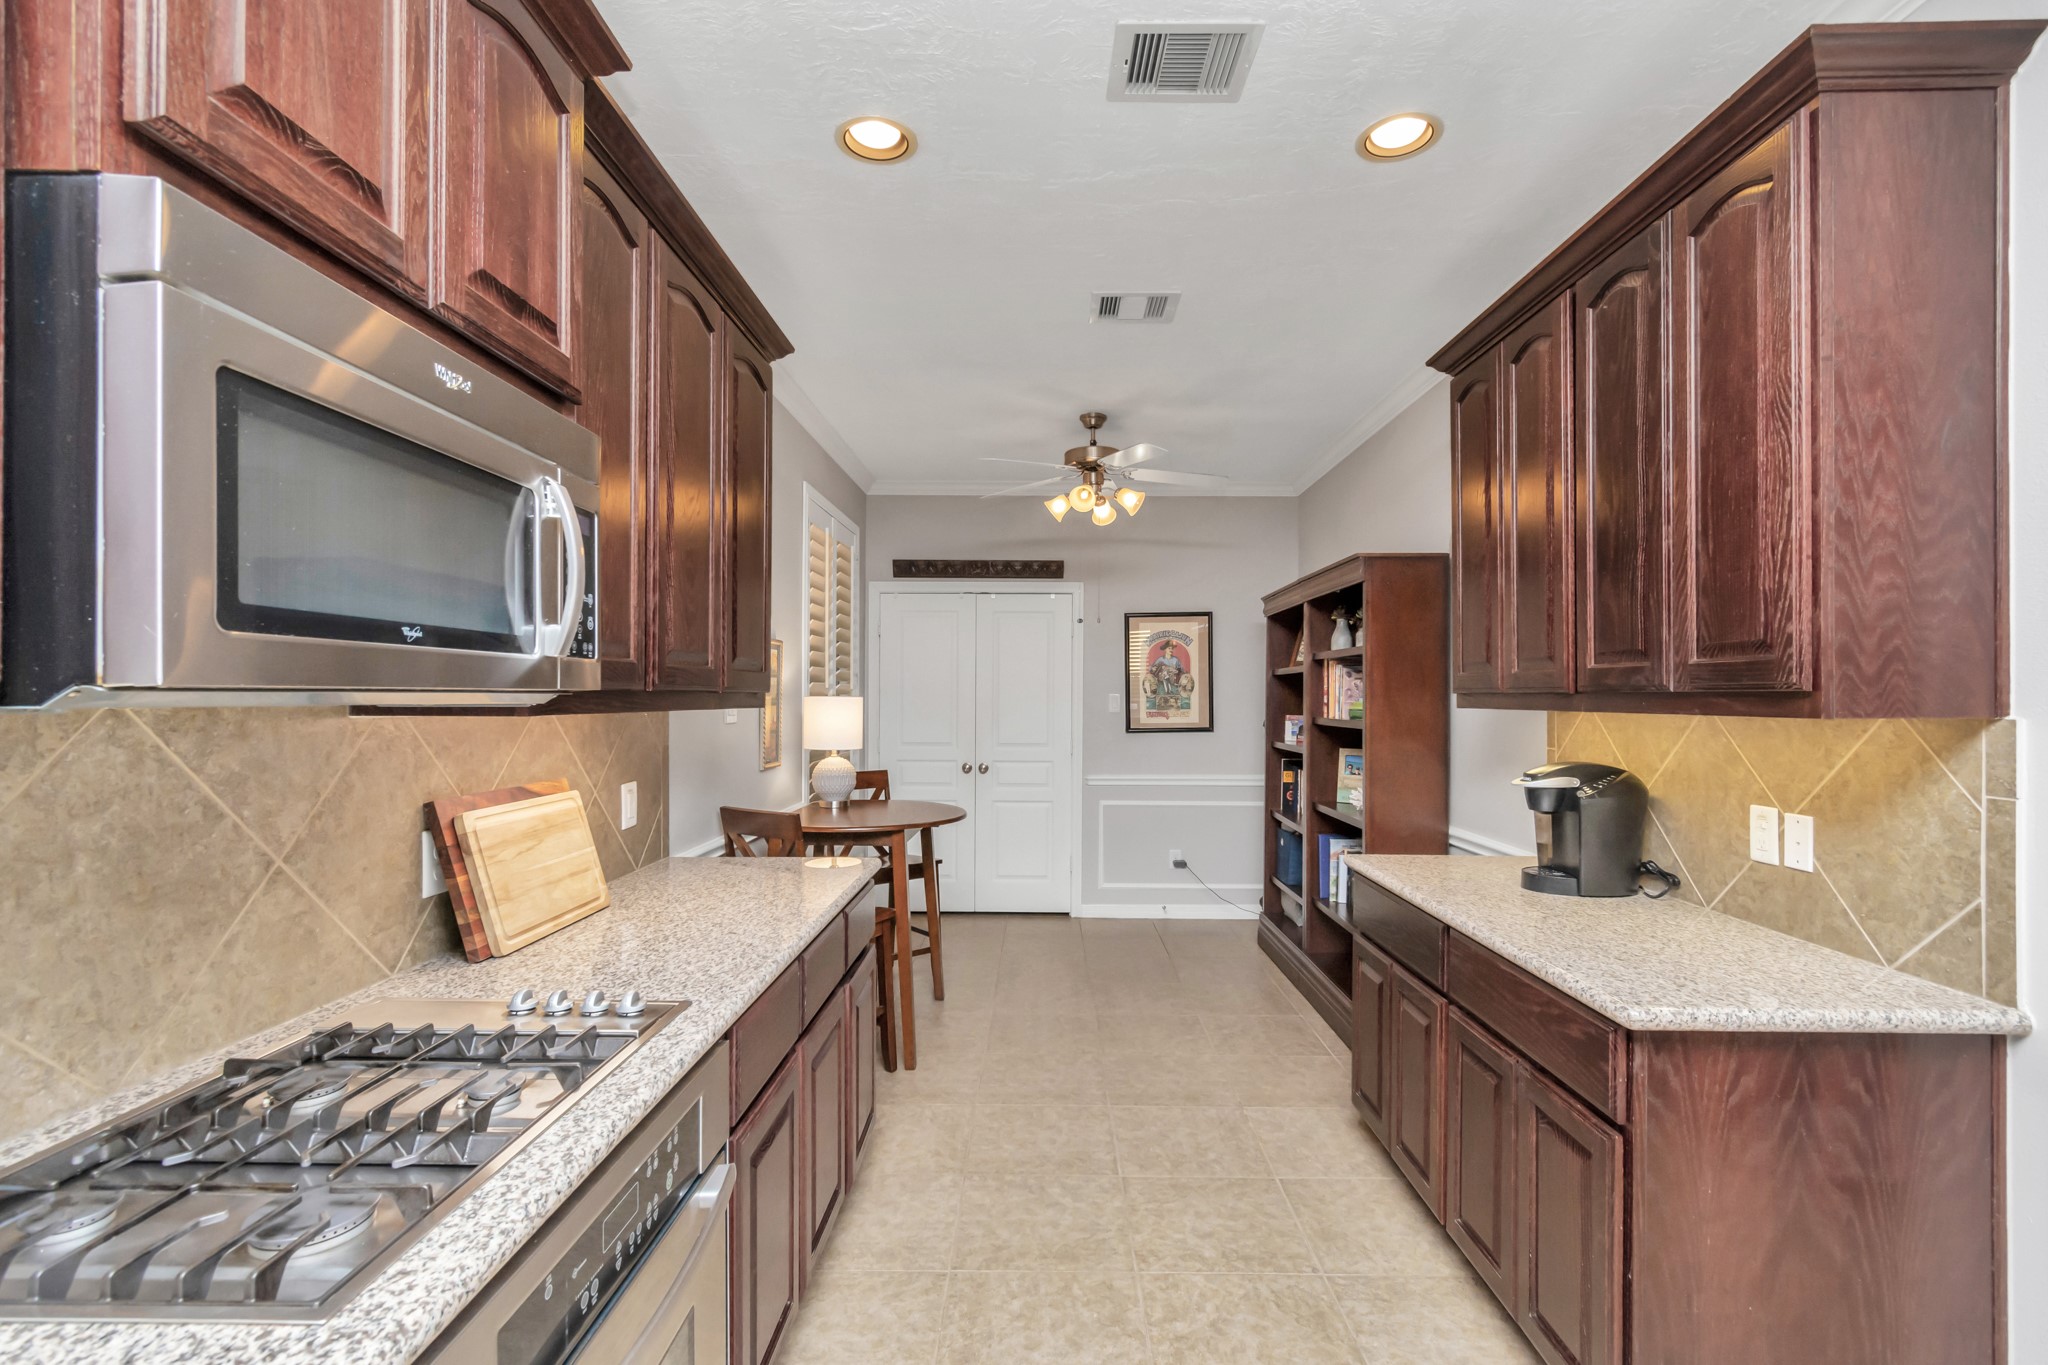 At the far end of the kitchen, a sizable double-door pantry awaits, offering extensive storage for your essentials.